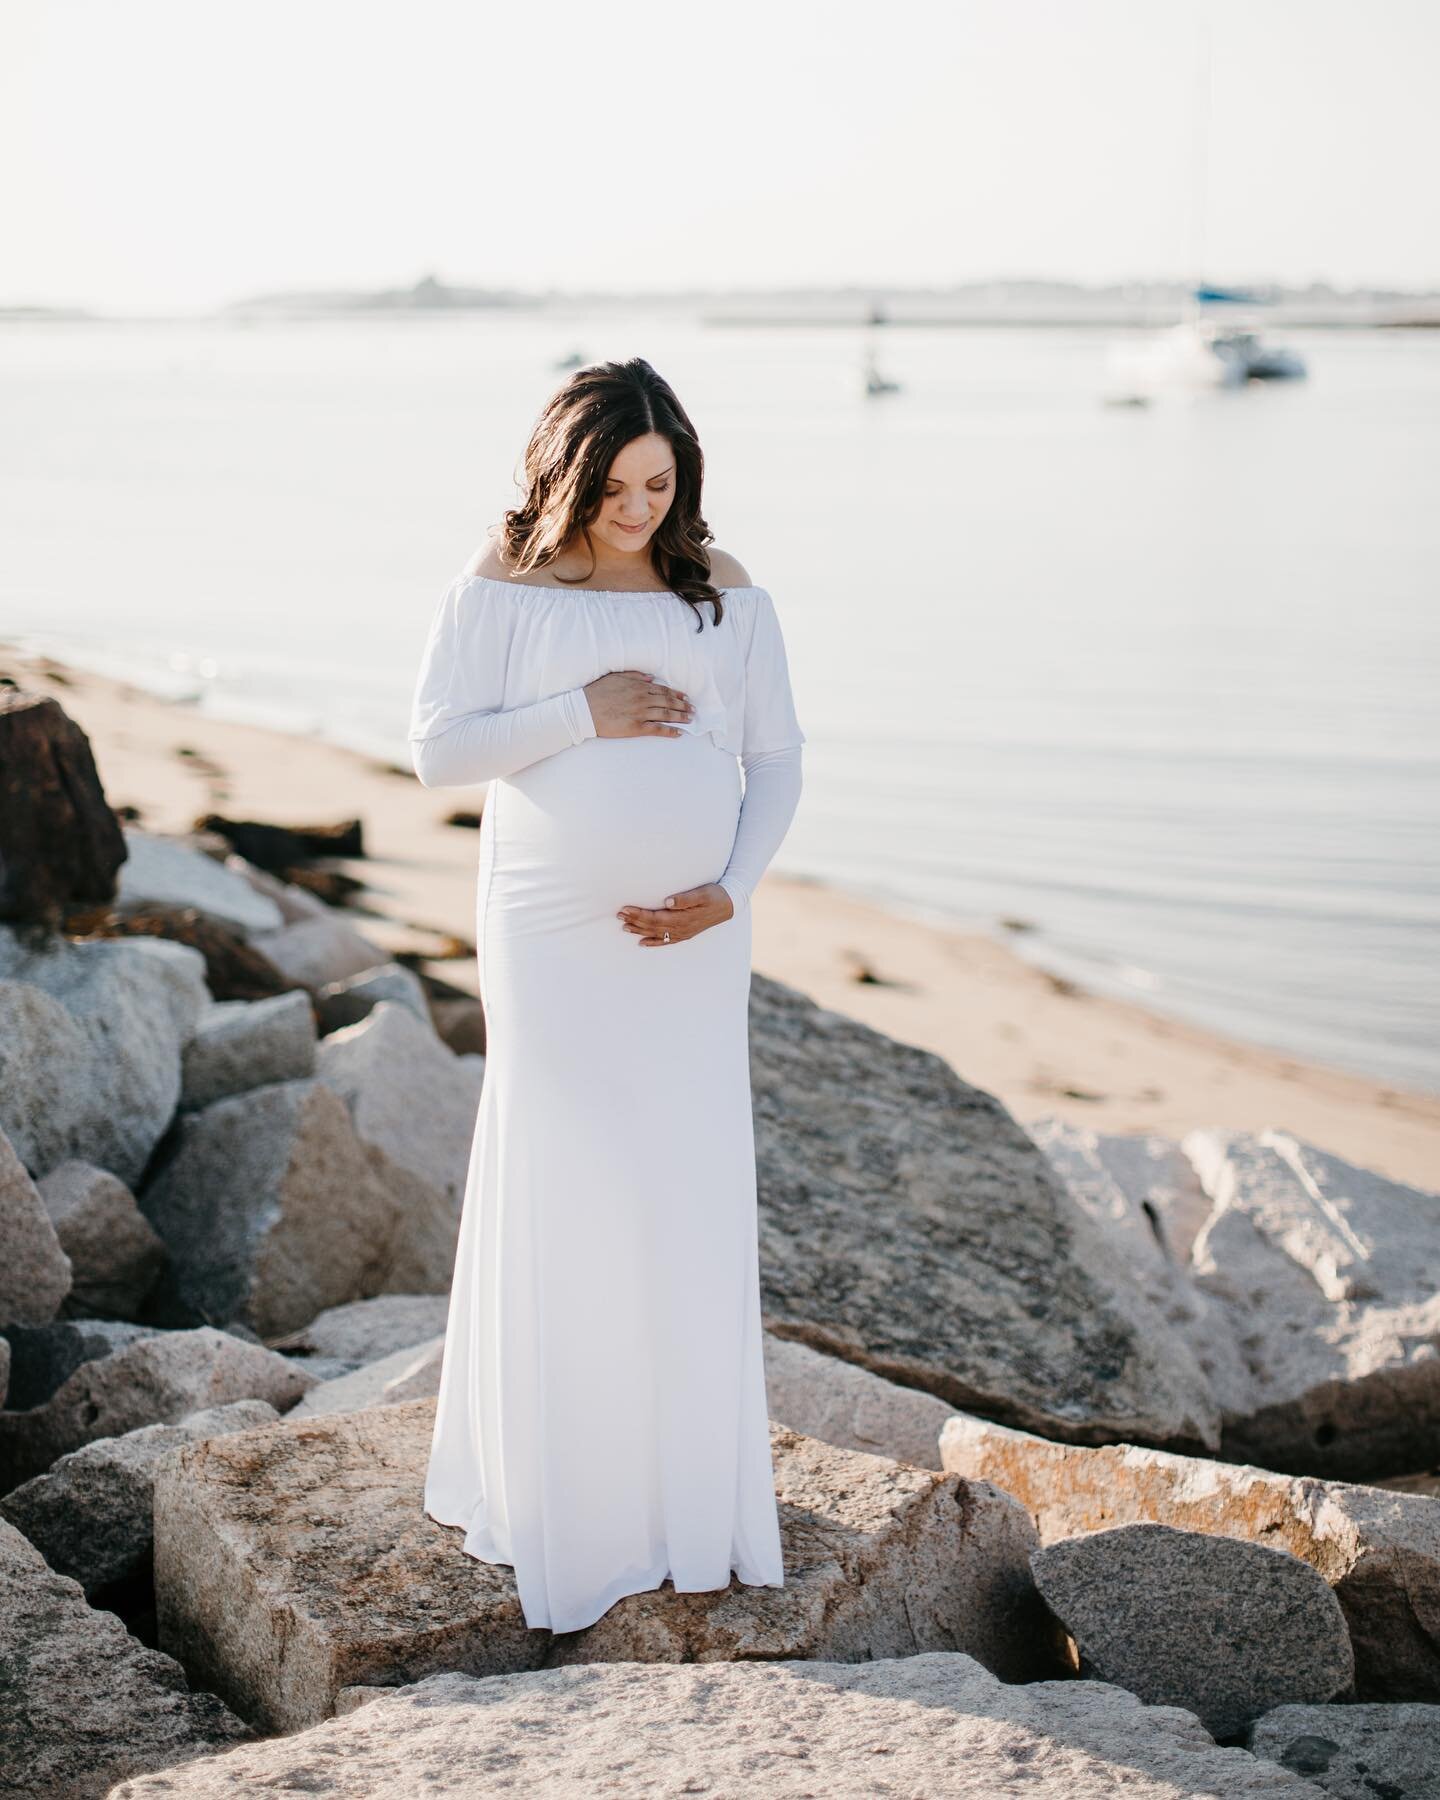 On this rainy day, I&rsquo;m daydreaming of warm sunrises at the beach. I have many maternity shoots coming up and I&rsquo;m so excited to photograph beautiful mommas! 💗